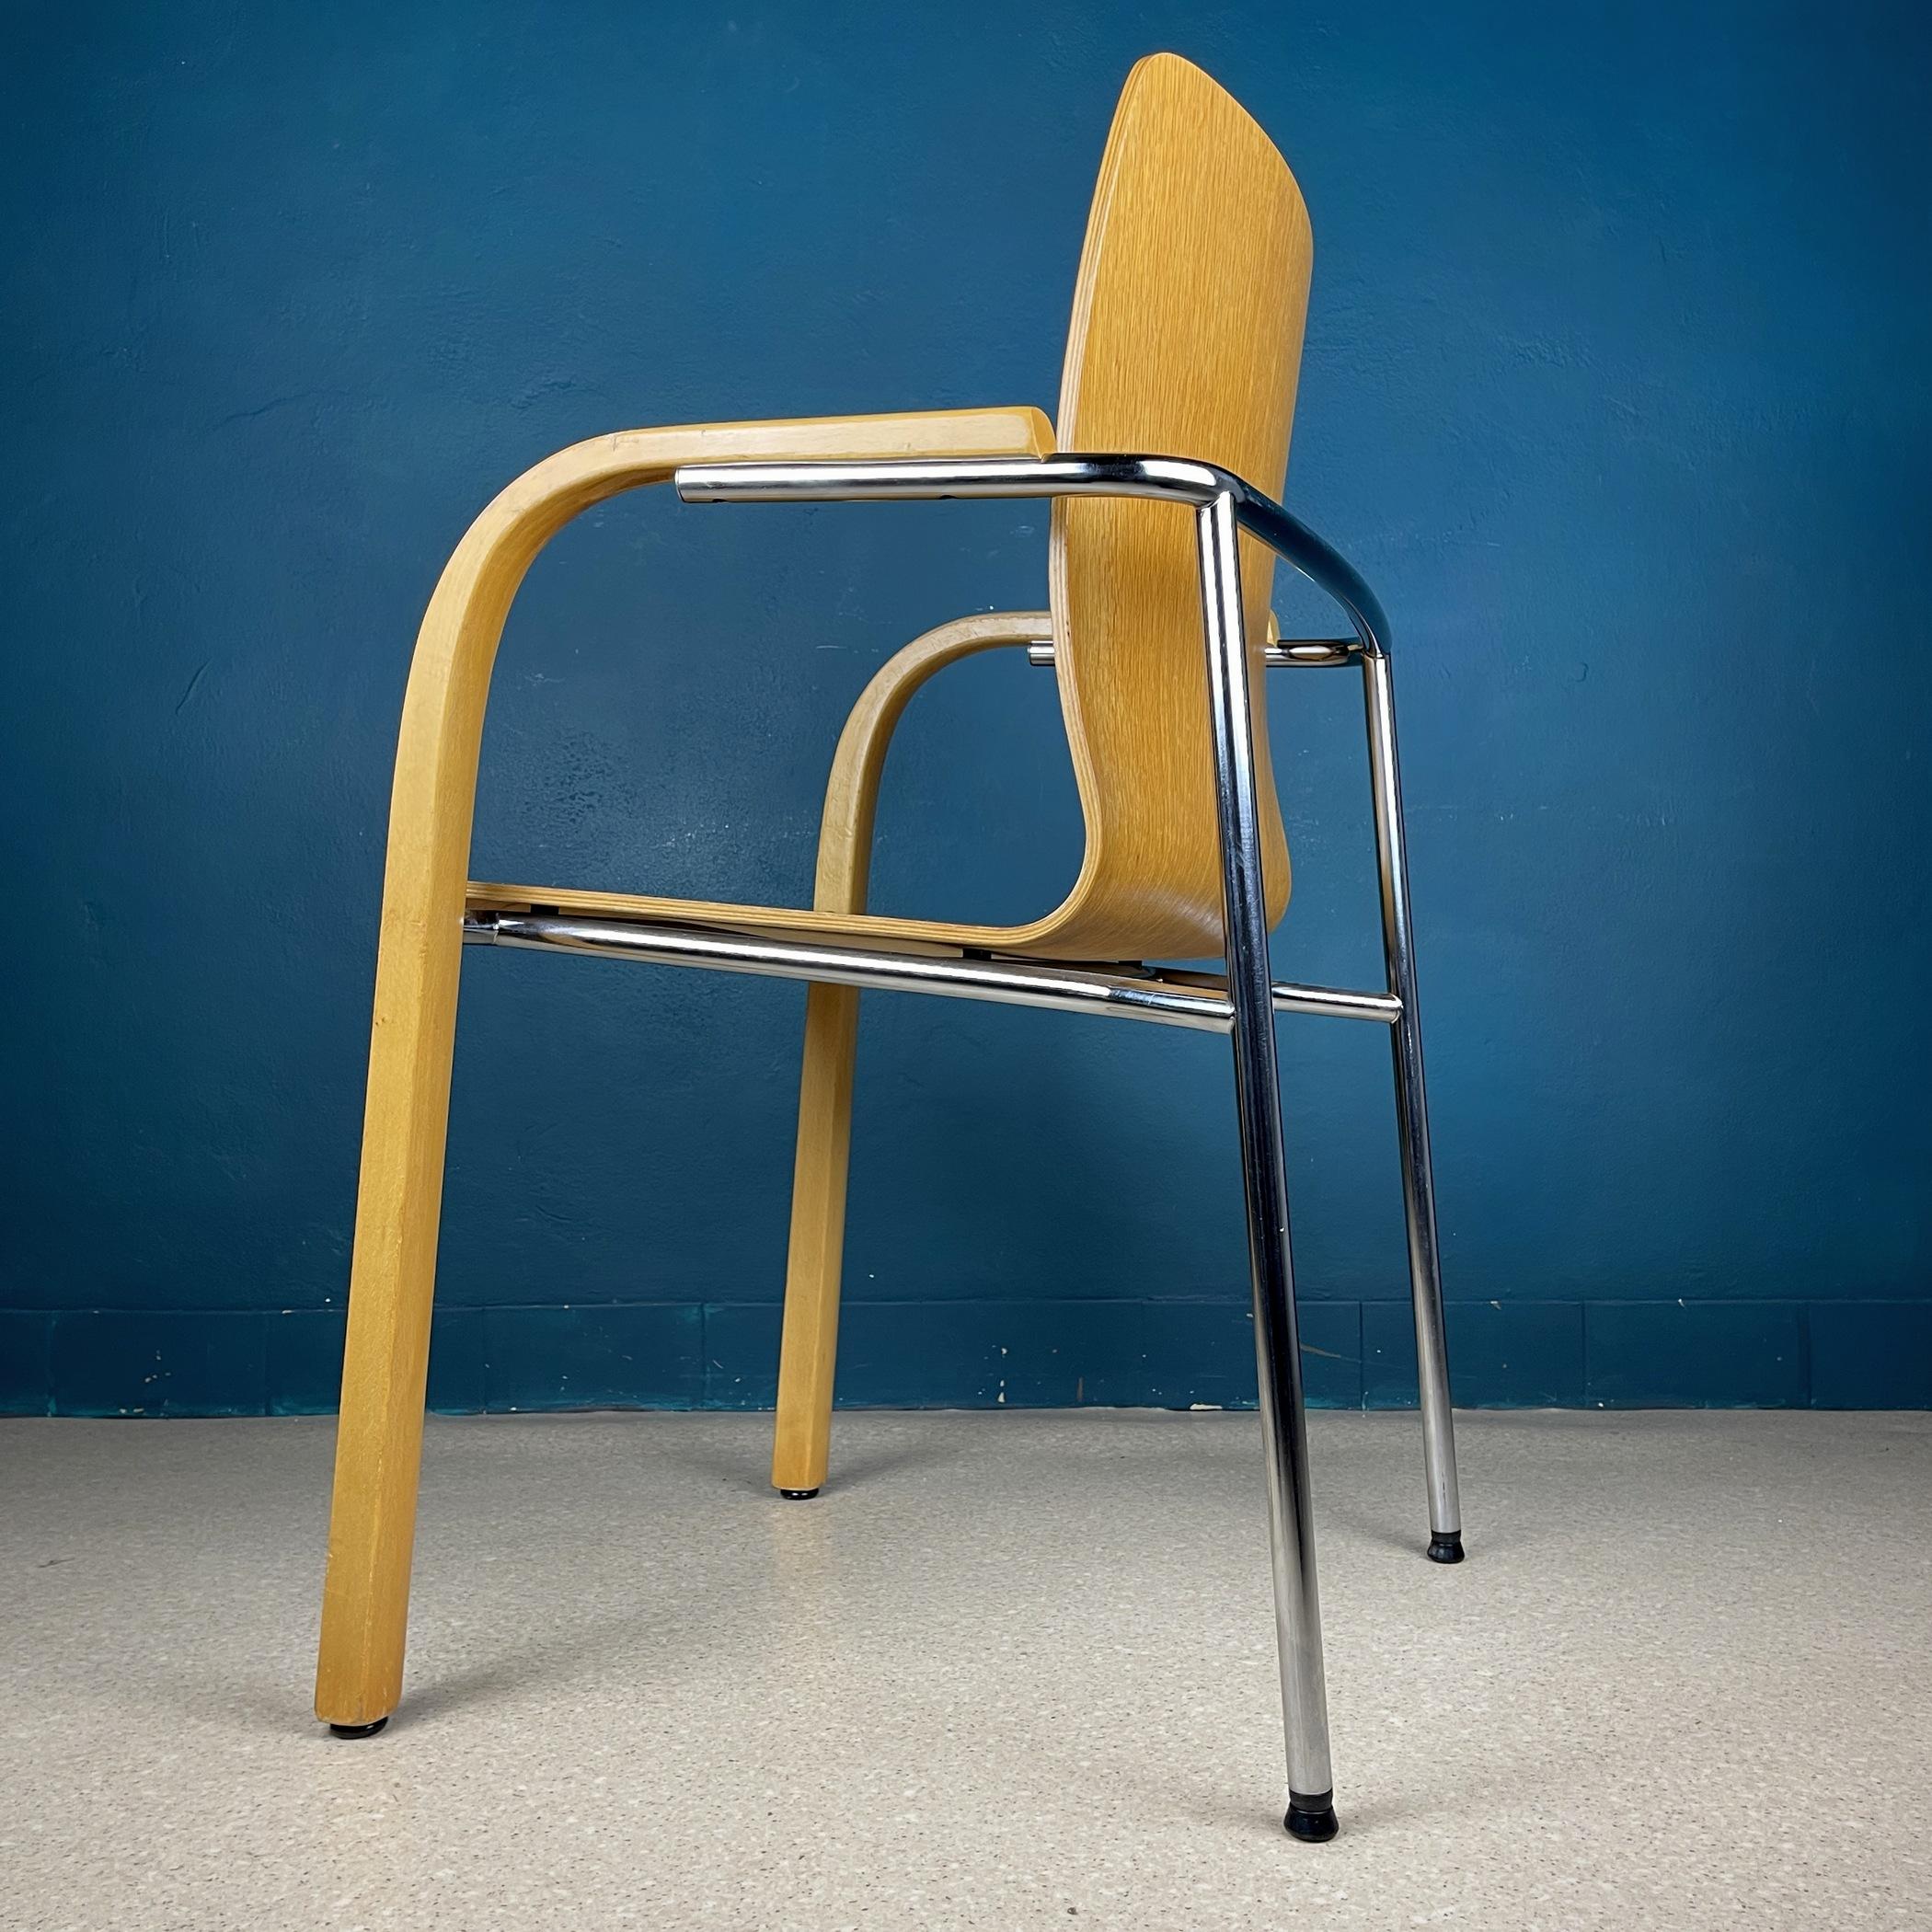 20th Century Mid-Century Dining Chair by Stol Kamnik from Yugoslavia, 1980s For Sale